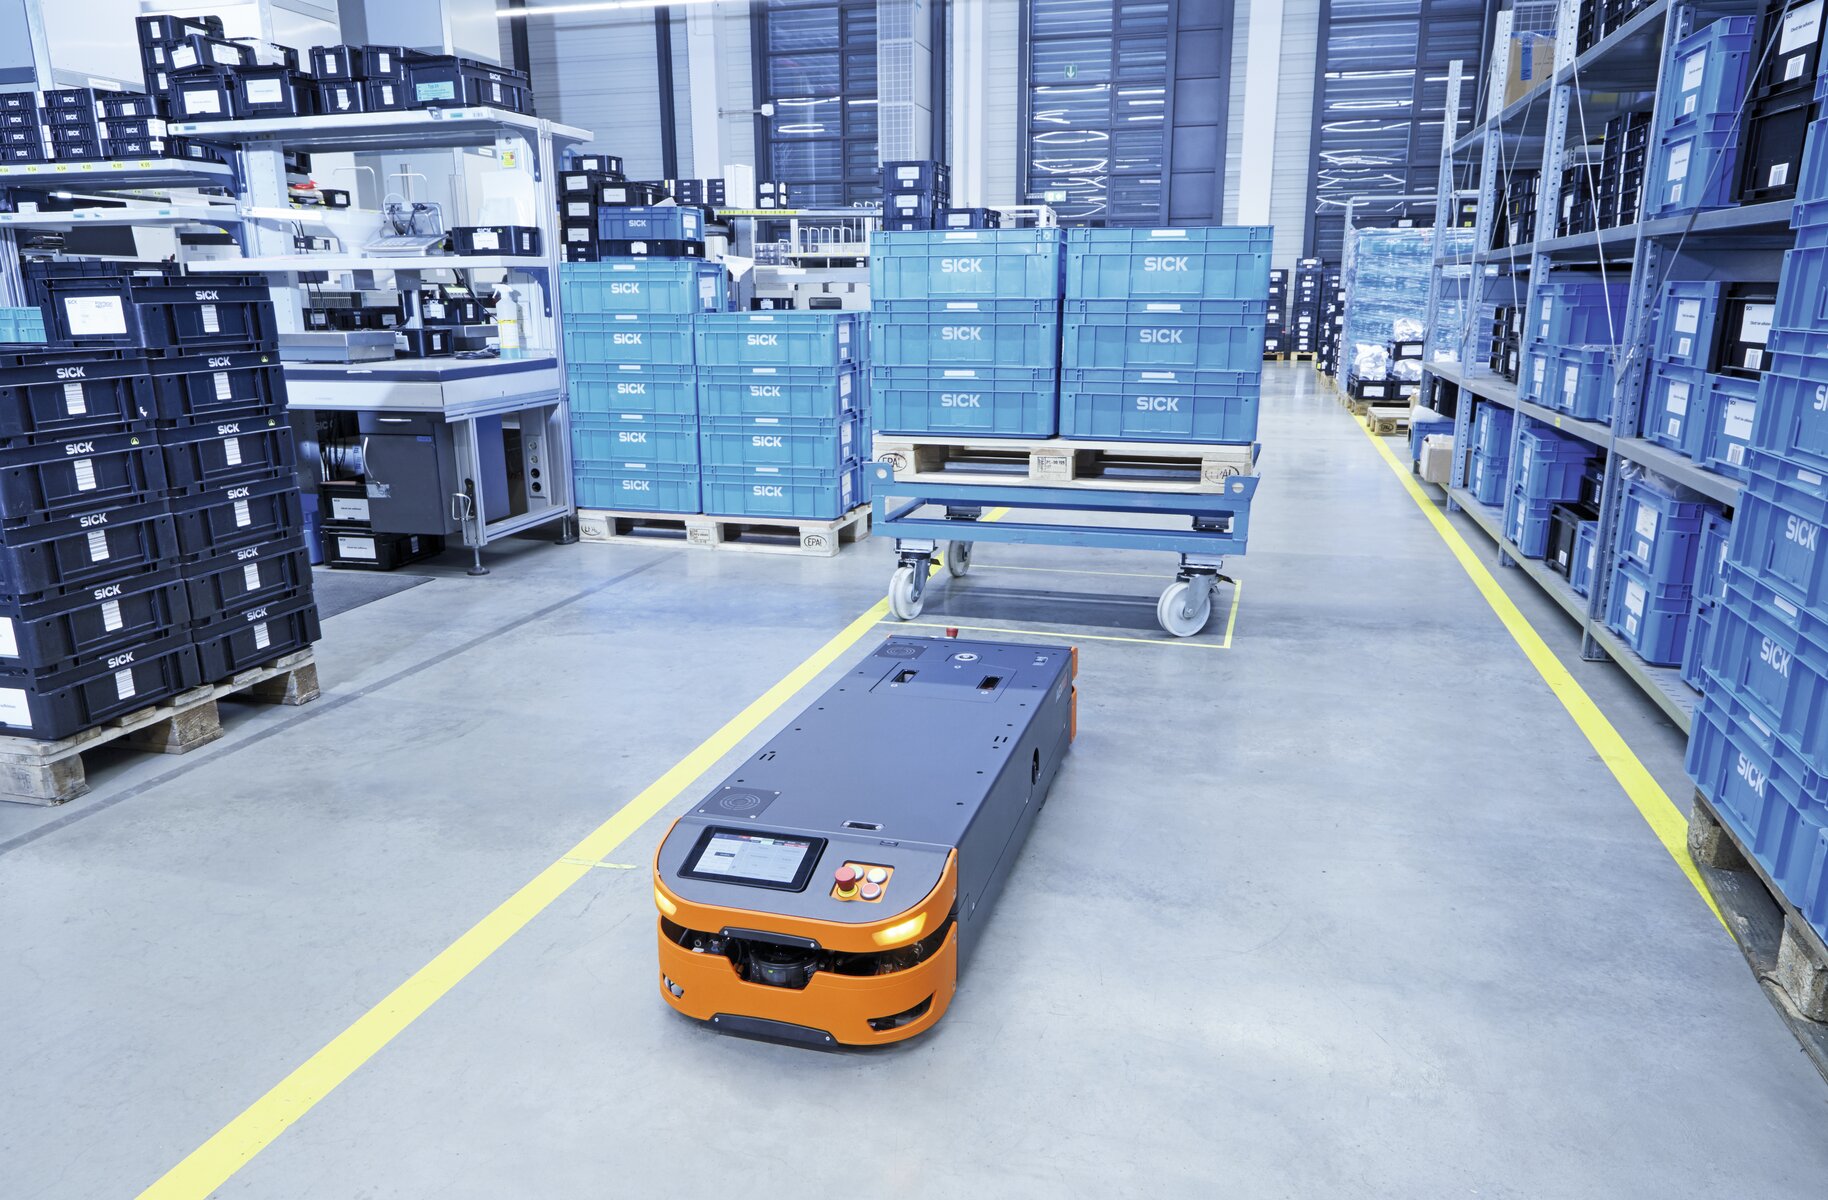 pallet pocket detection, Simplifying Automated Dolly Positioning and Pallet Pocket Detection